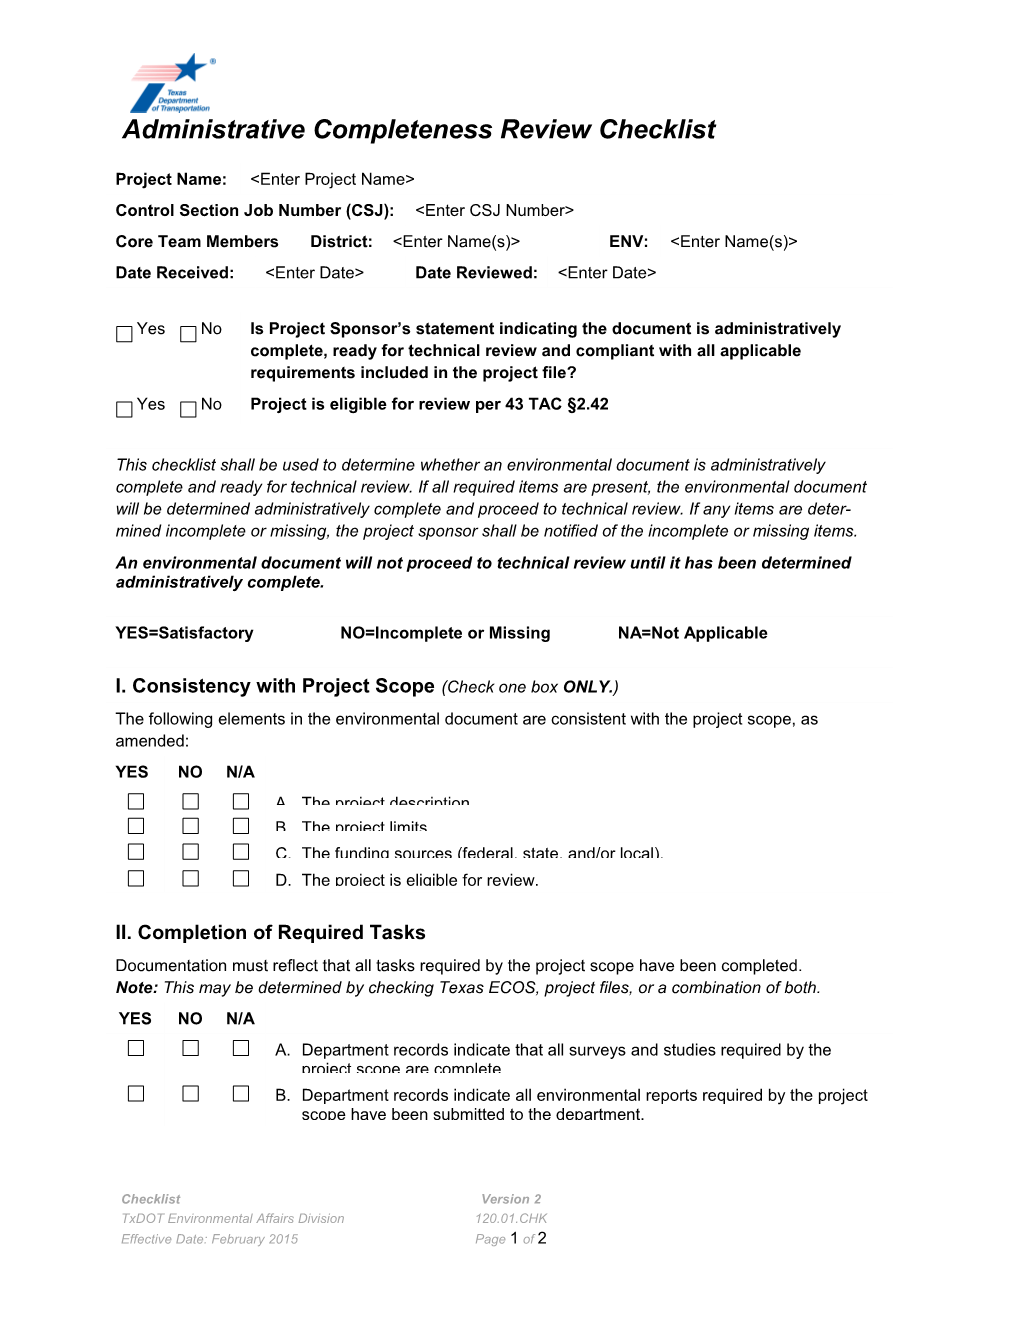 Administrative Completeness Review Checklist